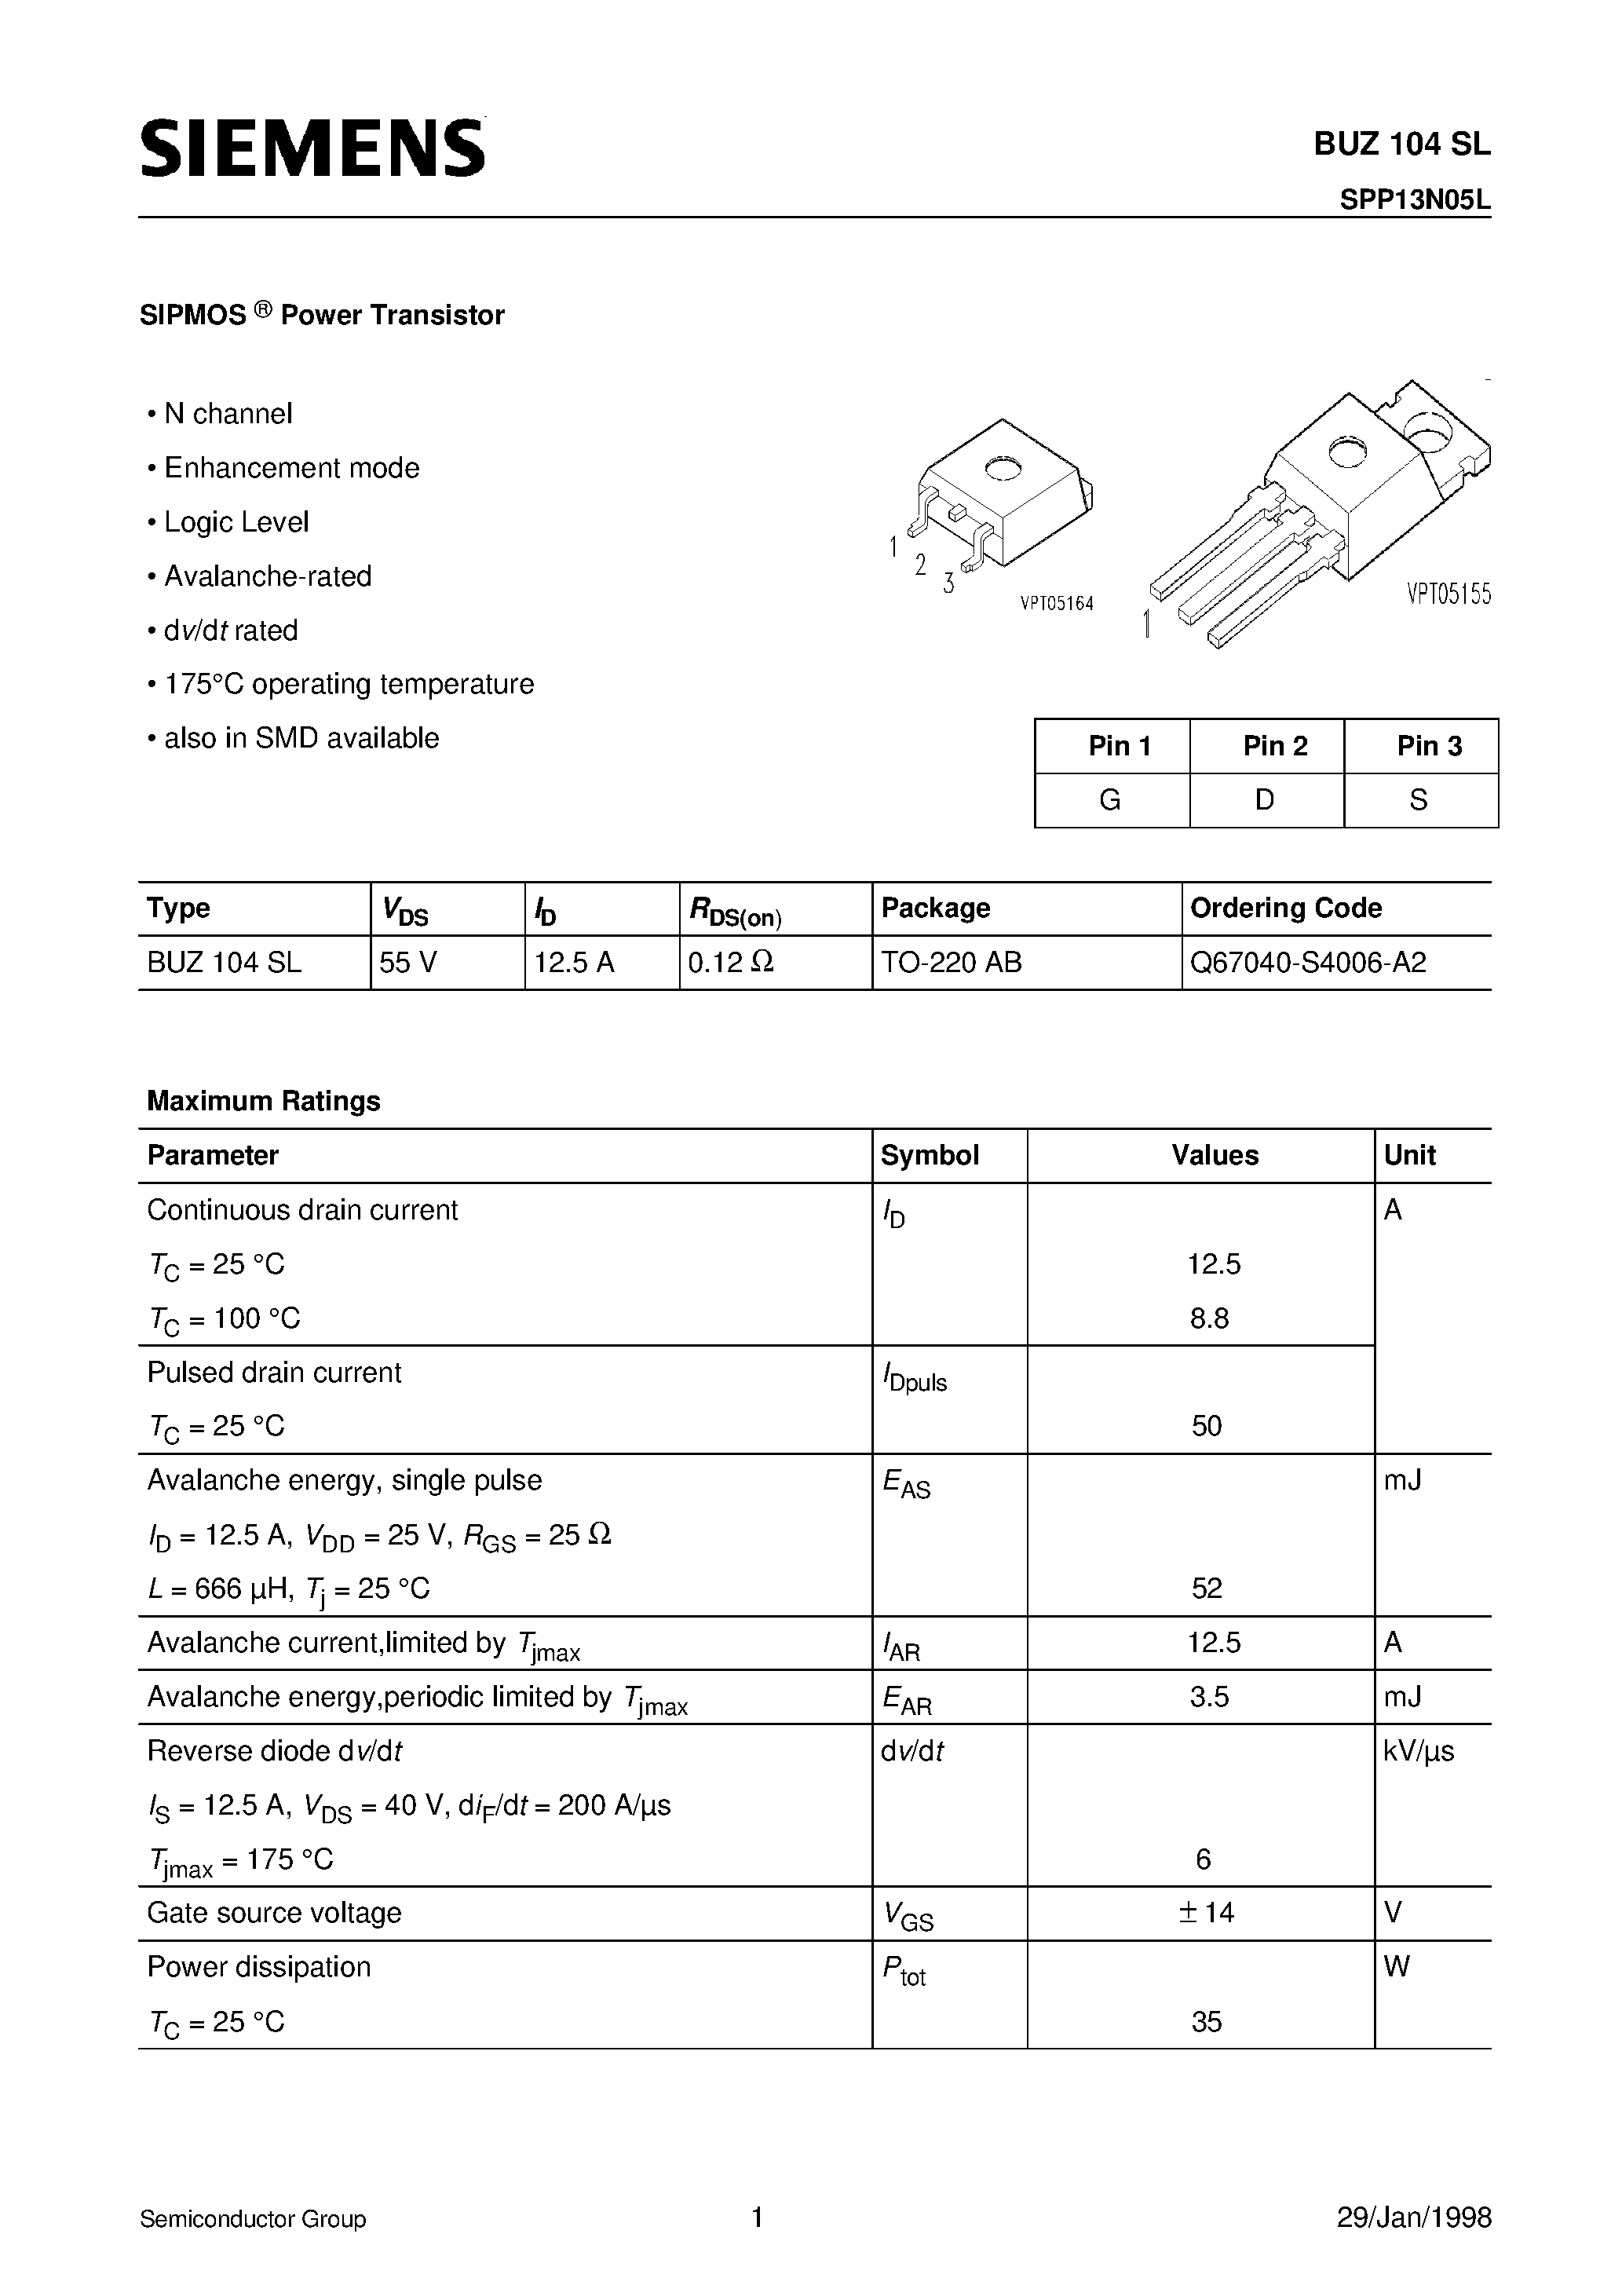 Datasheet BUZ104SL - SIPMOS Power Transistor (N channel Enhancement mode Logic Level Avalanche-rated dv/dt rated 175C operating temperature) page 1